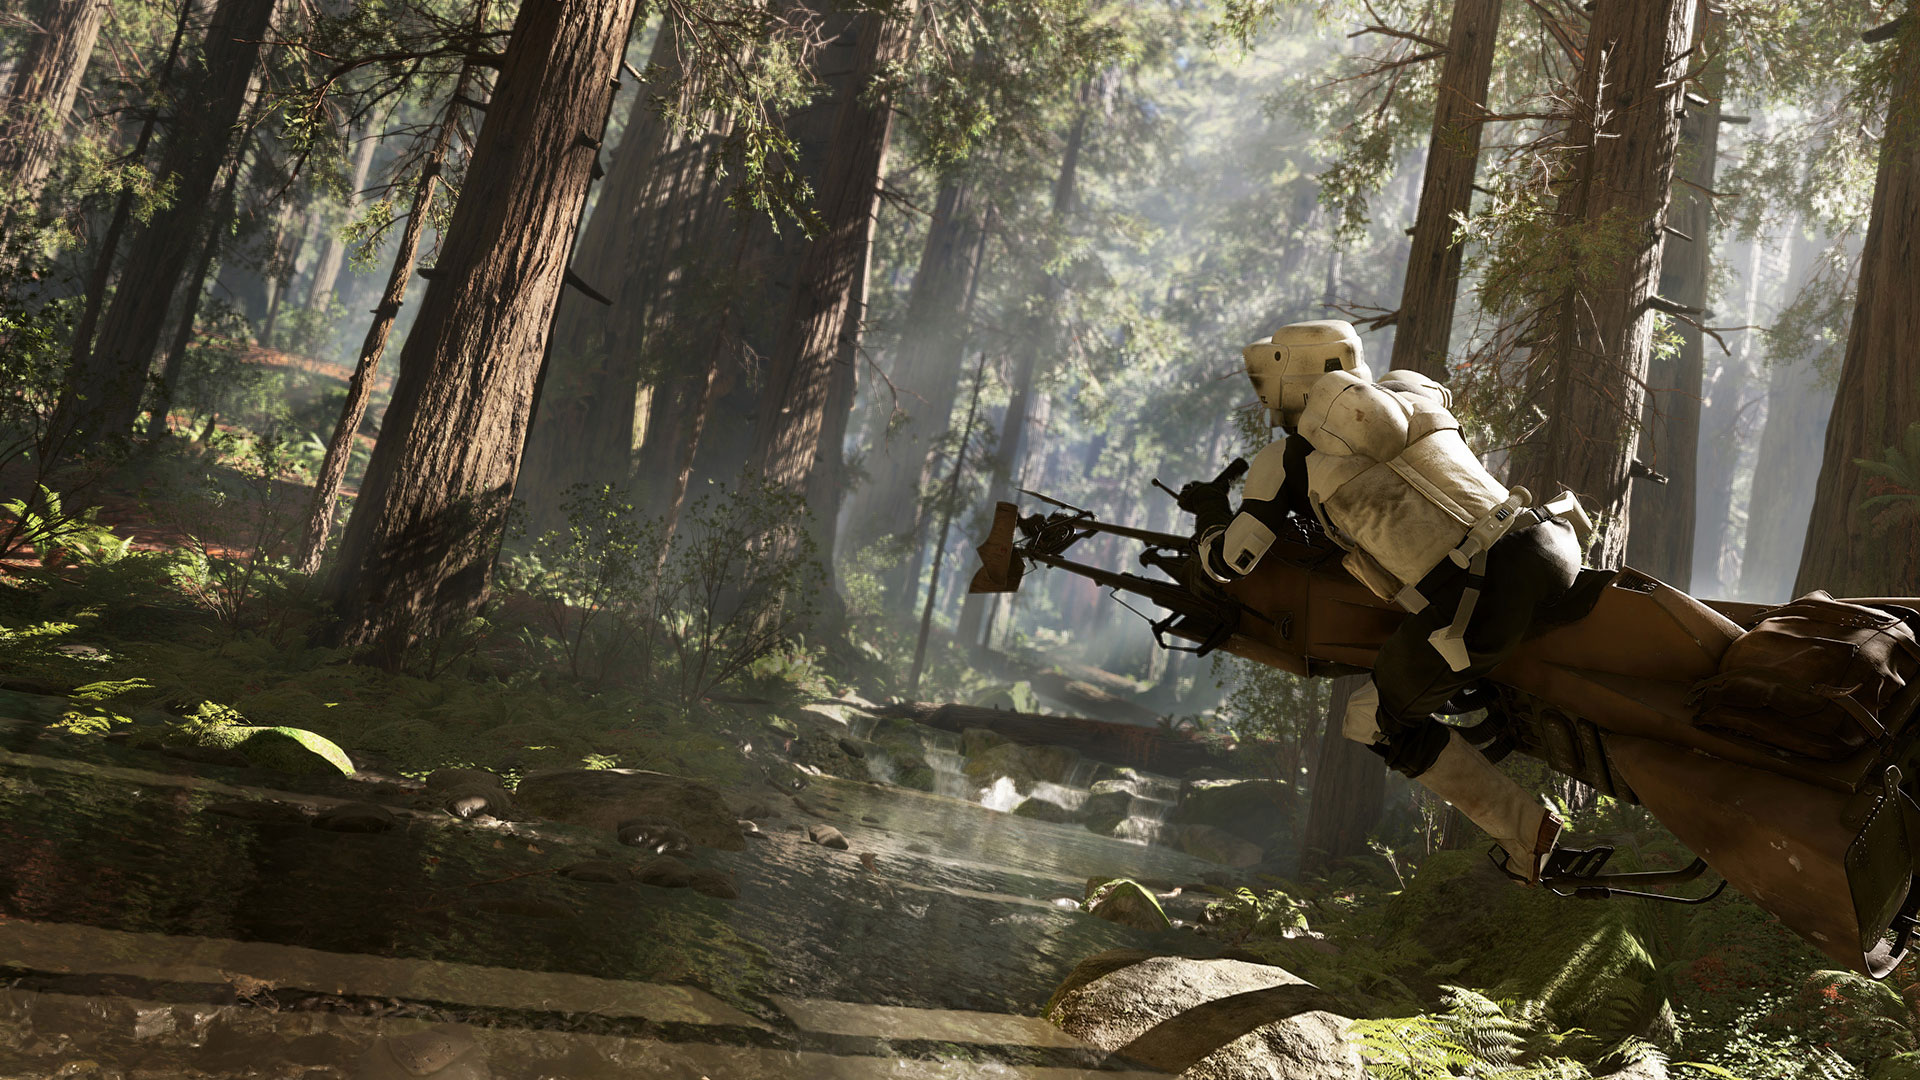 Star Wars Battlefront Release Date and First Screenshot Discovered